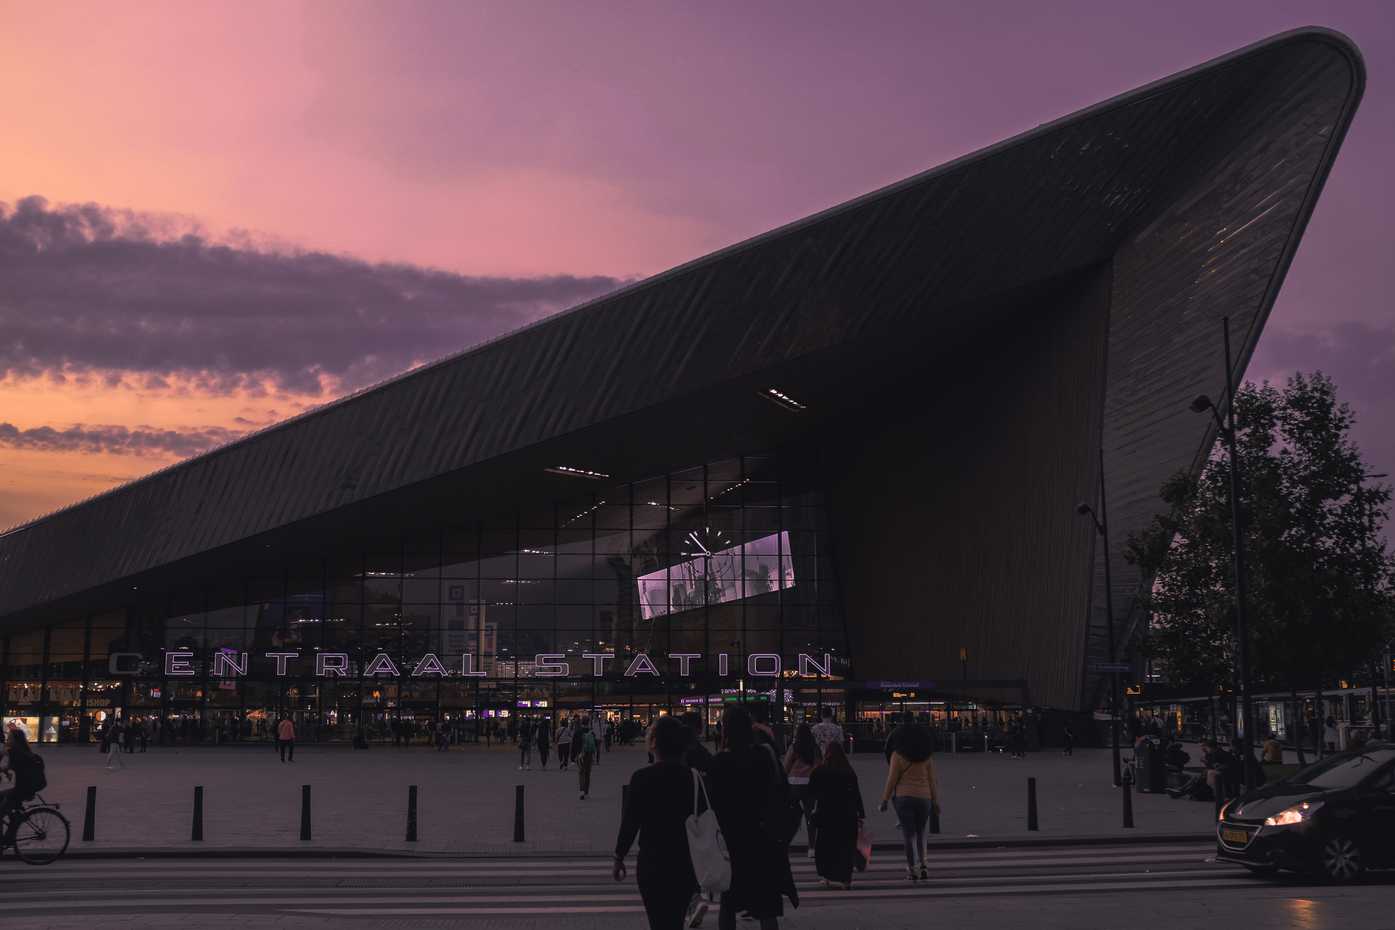 The Rotterdam Centraal Station at dusk